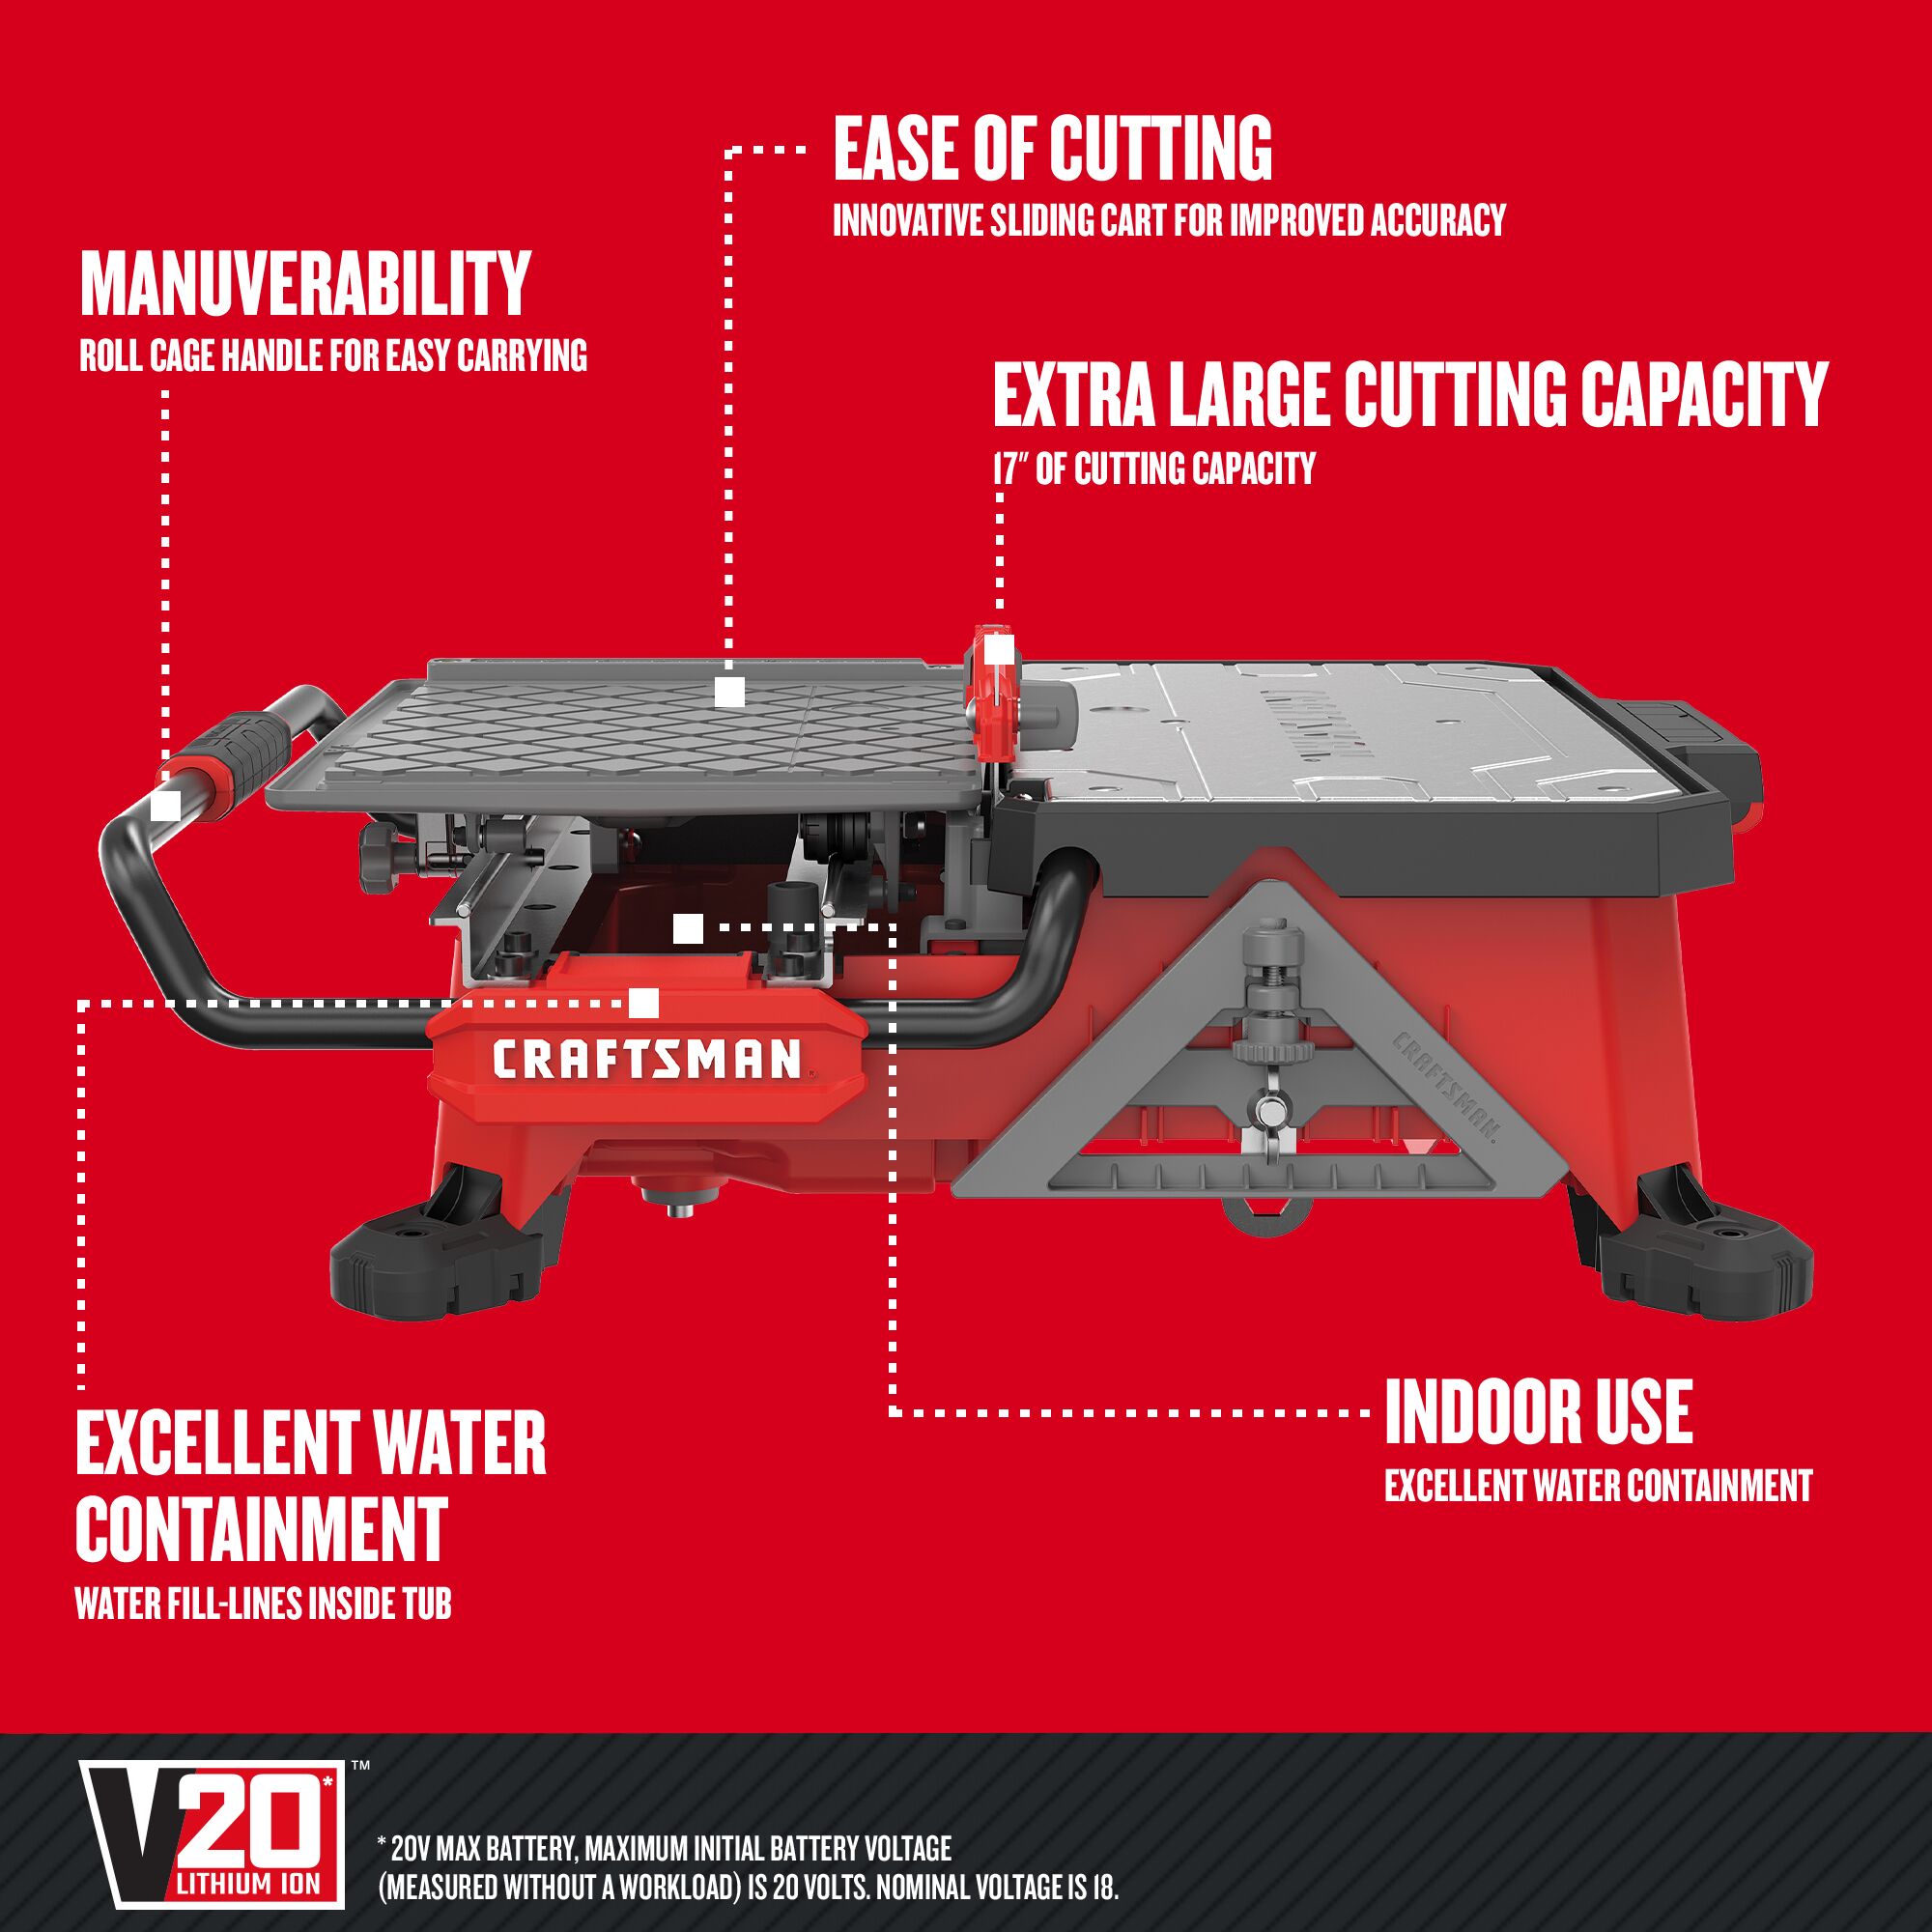 Graphic of CRAFTSMAN Tile Saw highlighting product features